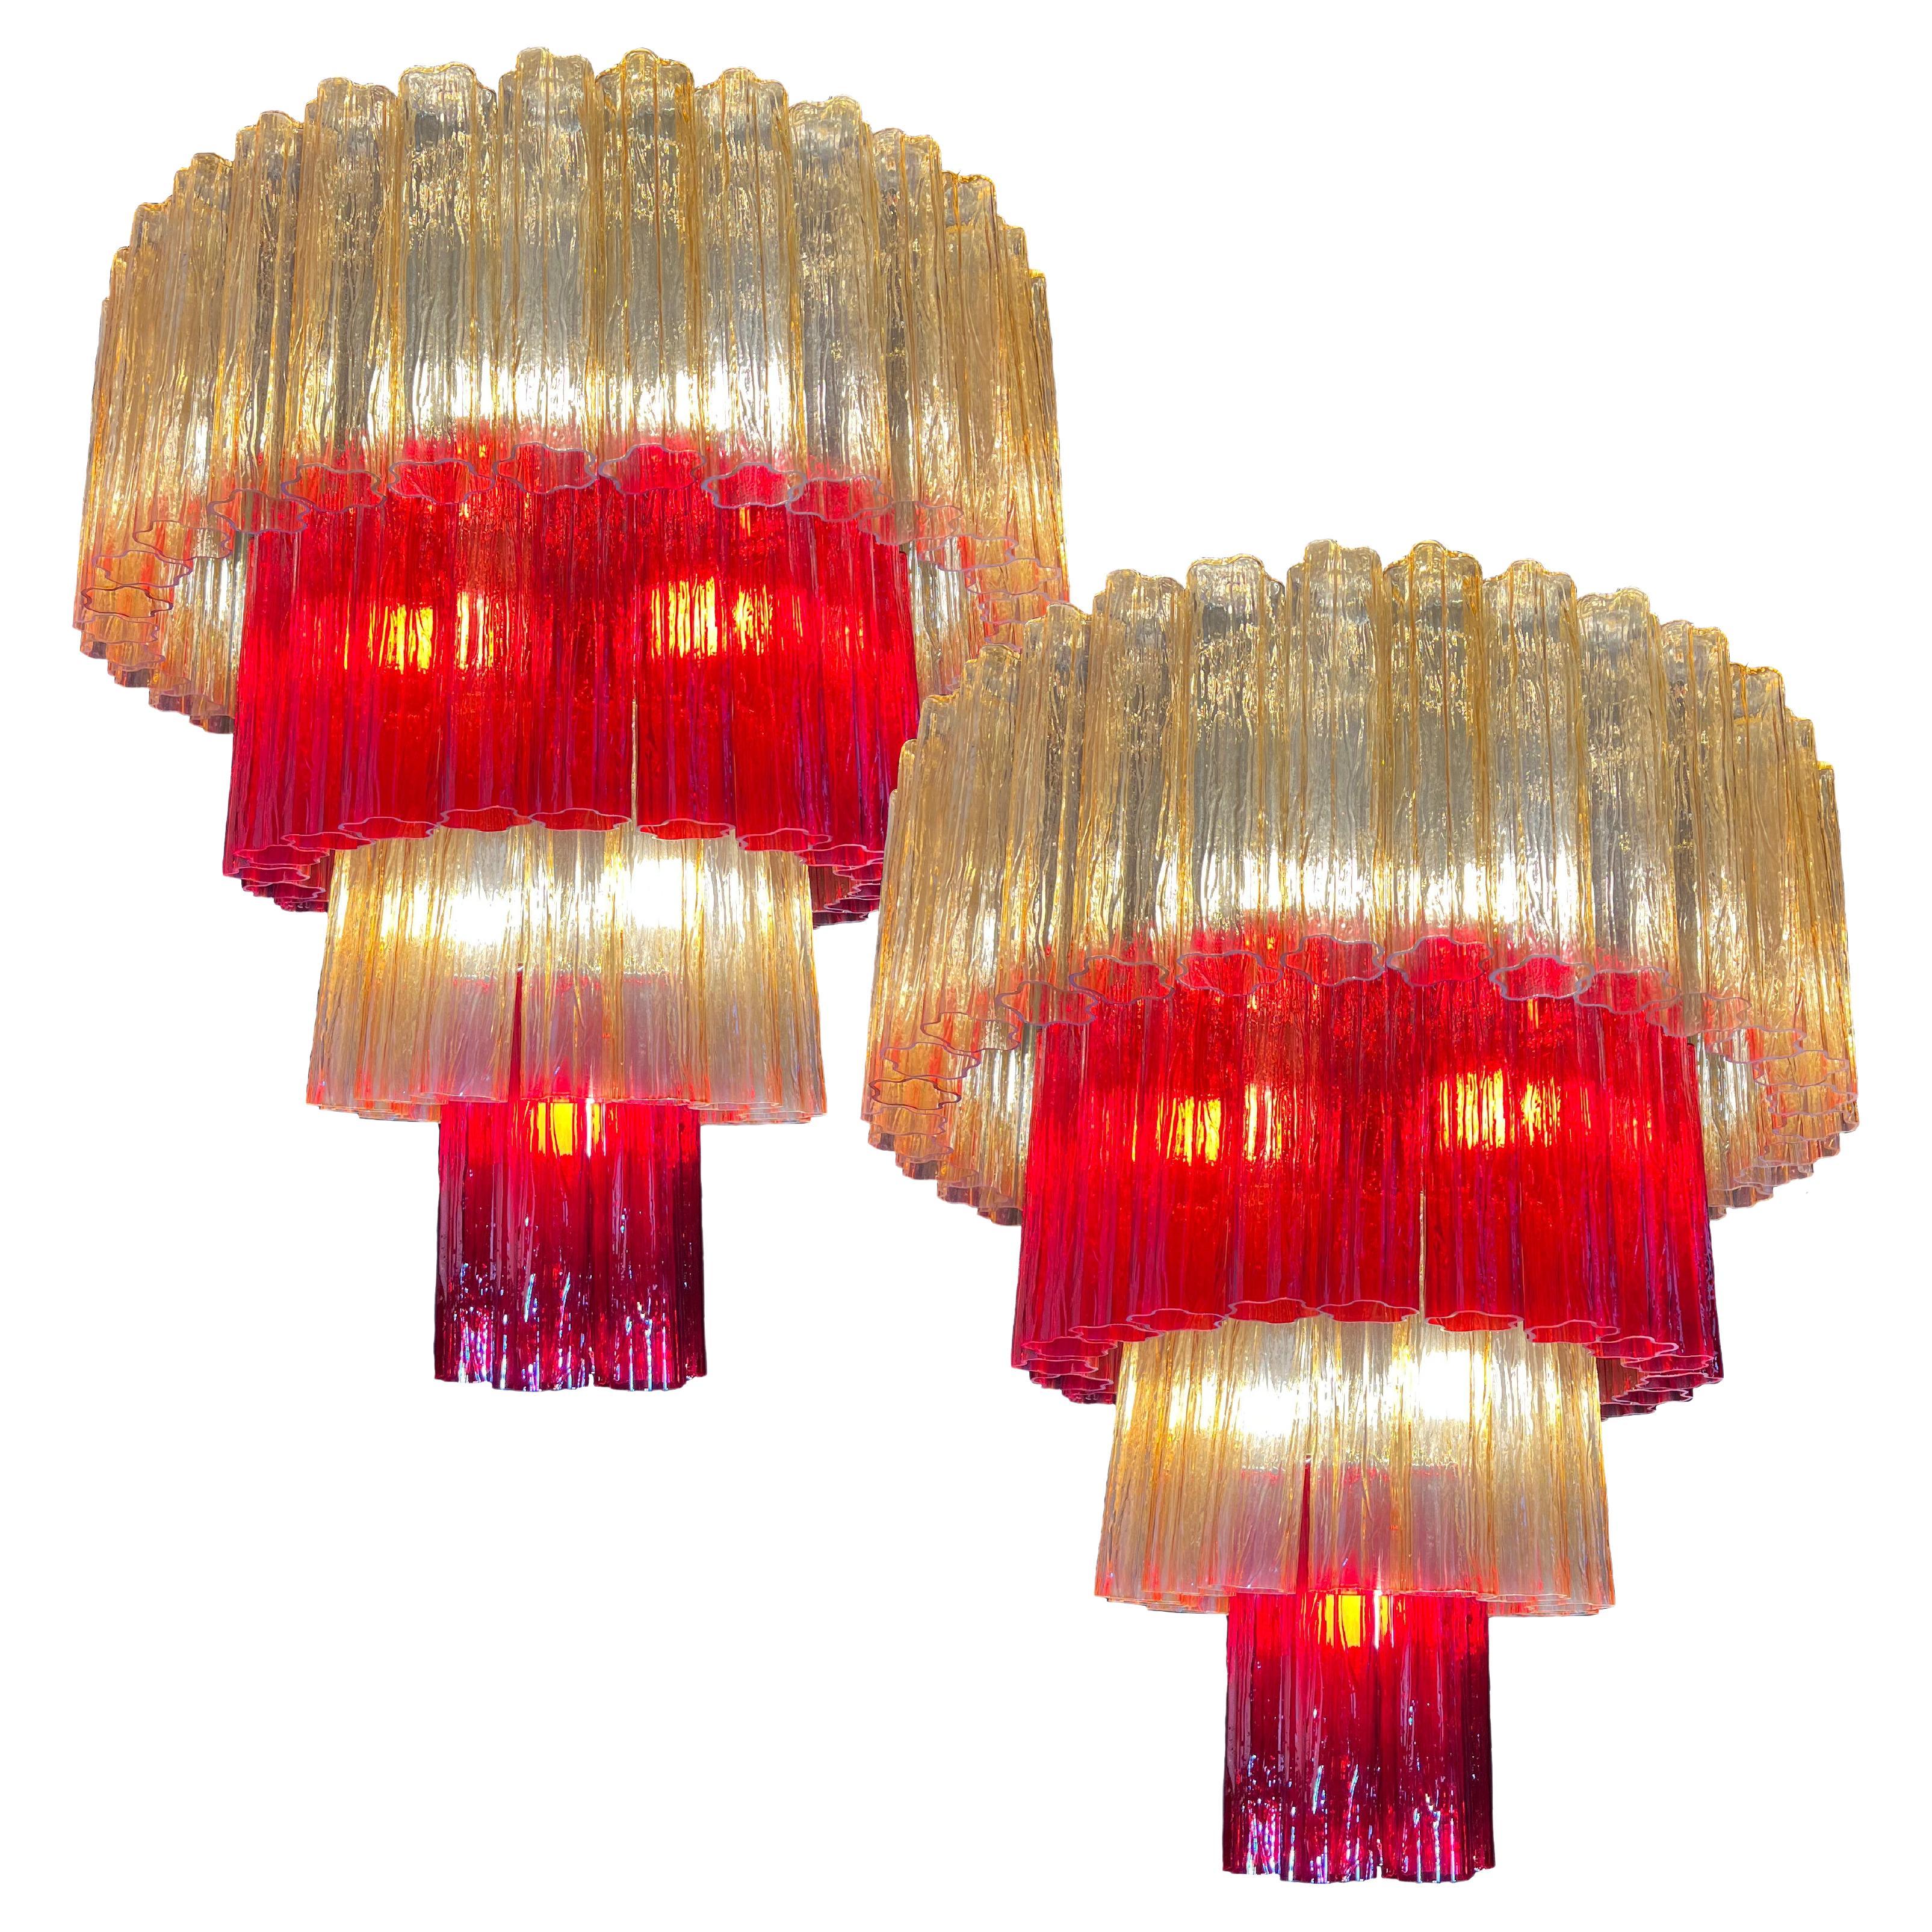 Luxurious Pair of Murano Chandeliers by Valentina Planta